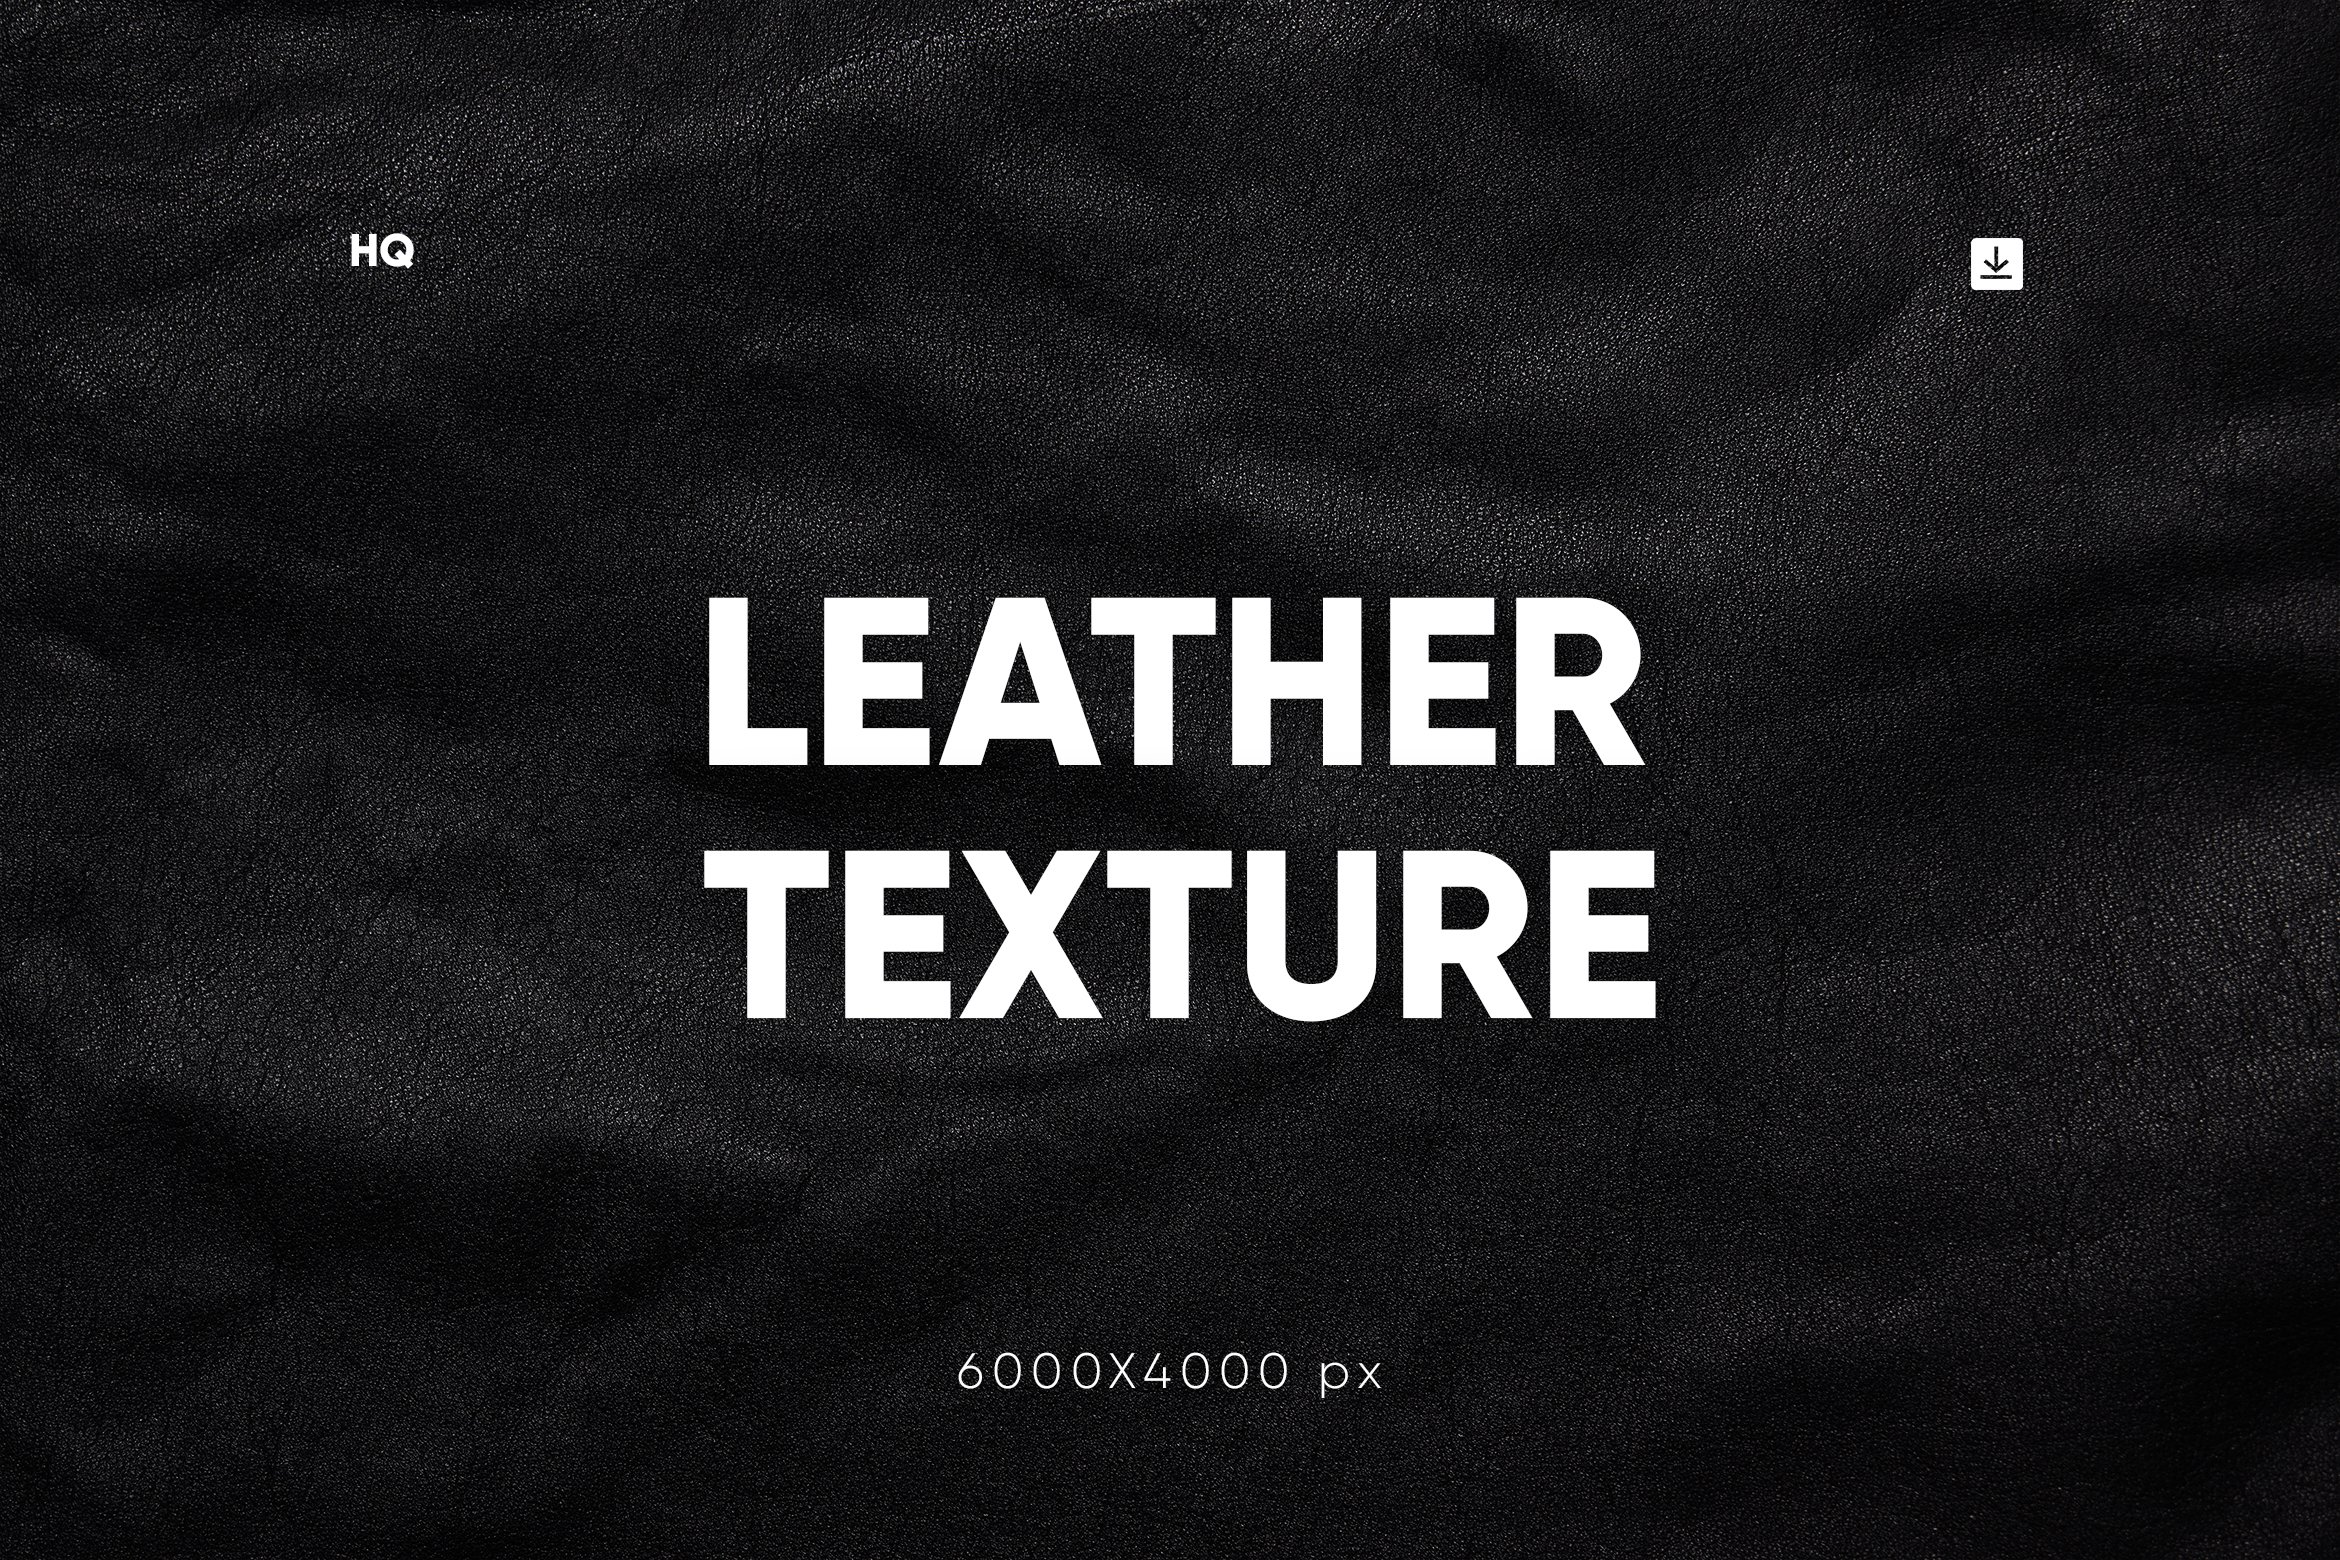 20 Leather Textures cover image.